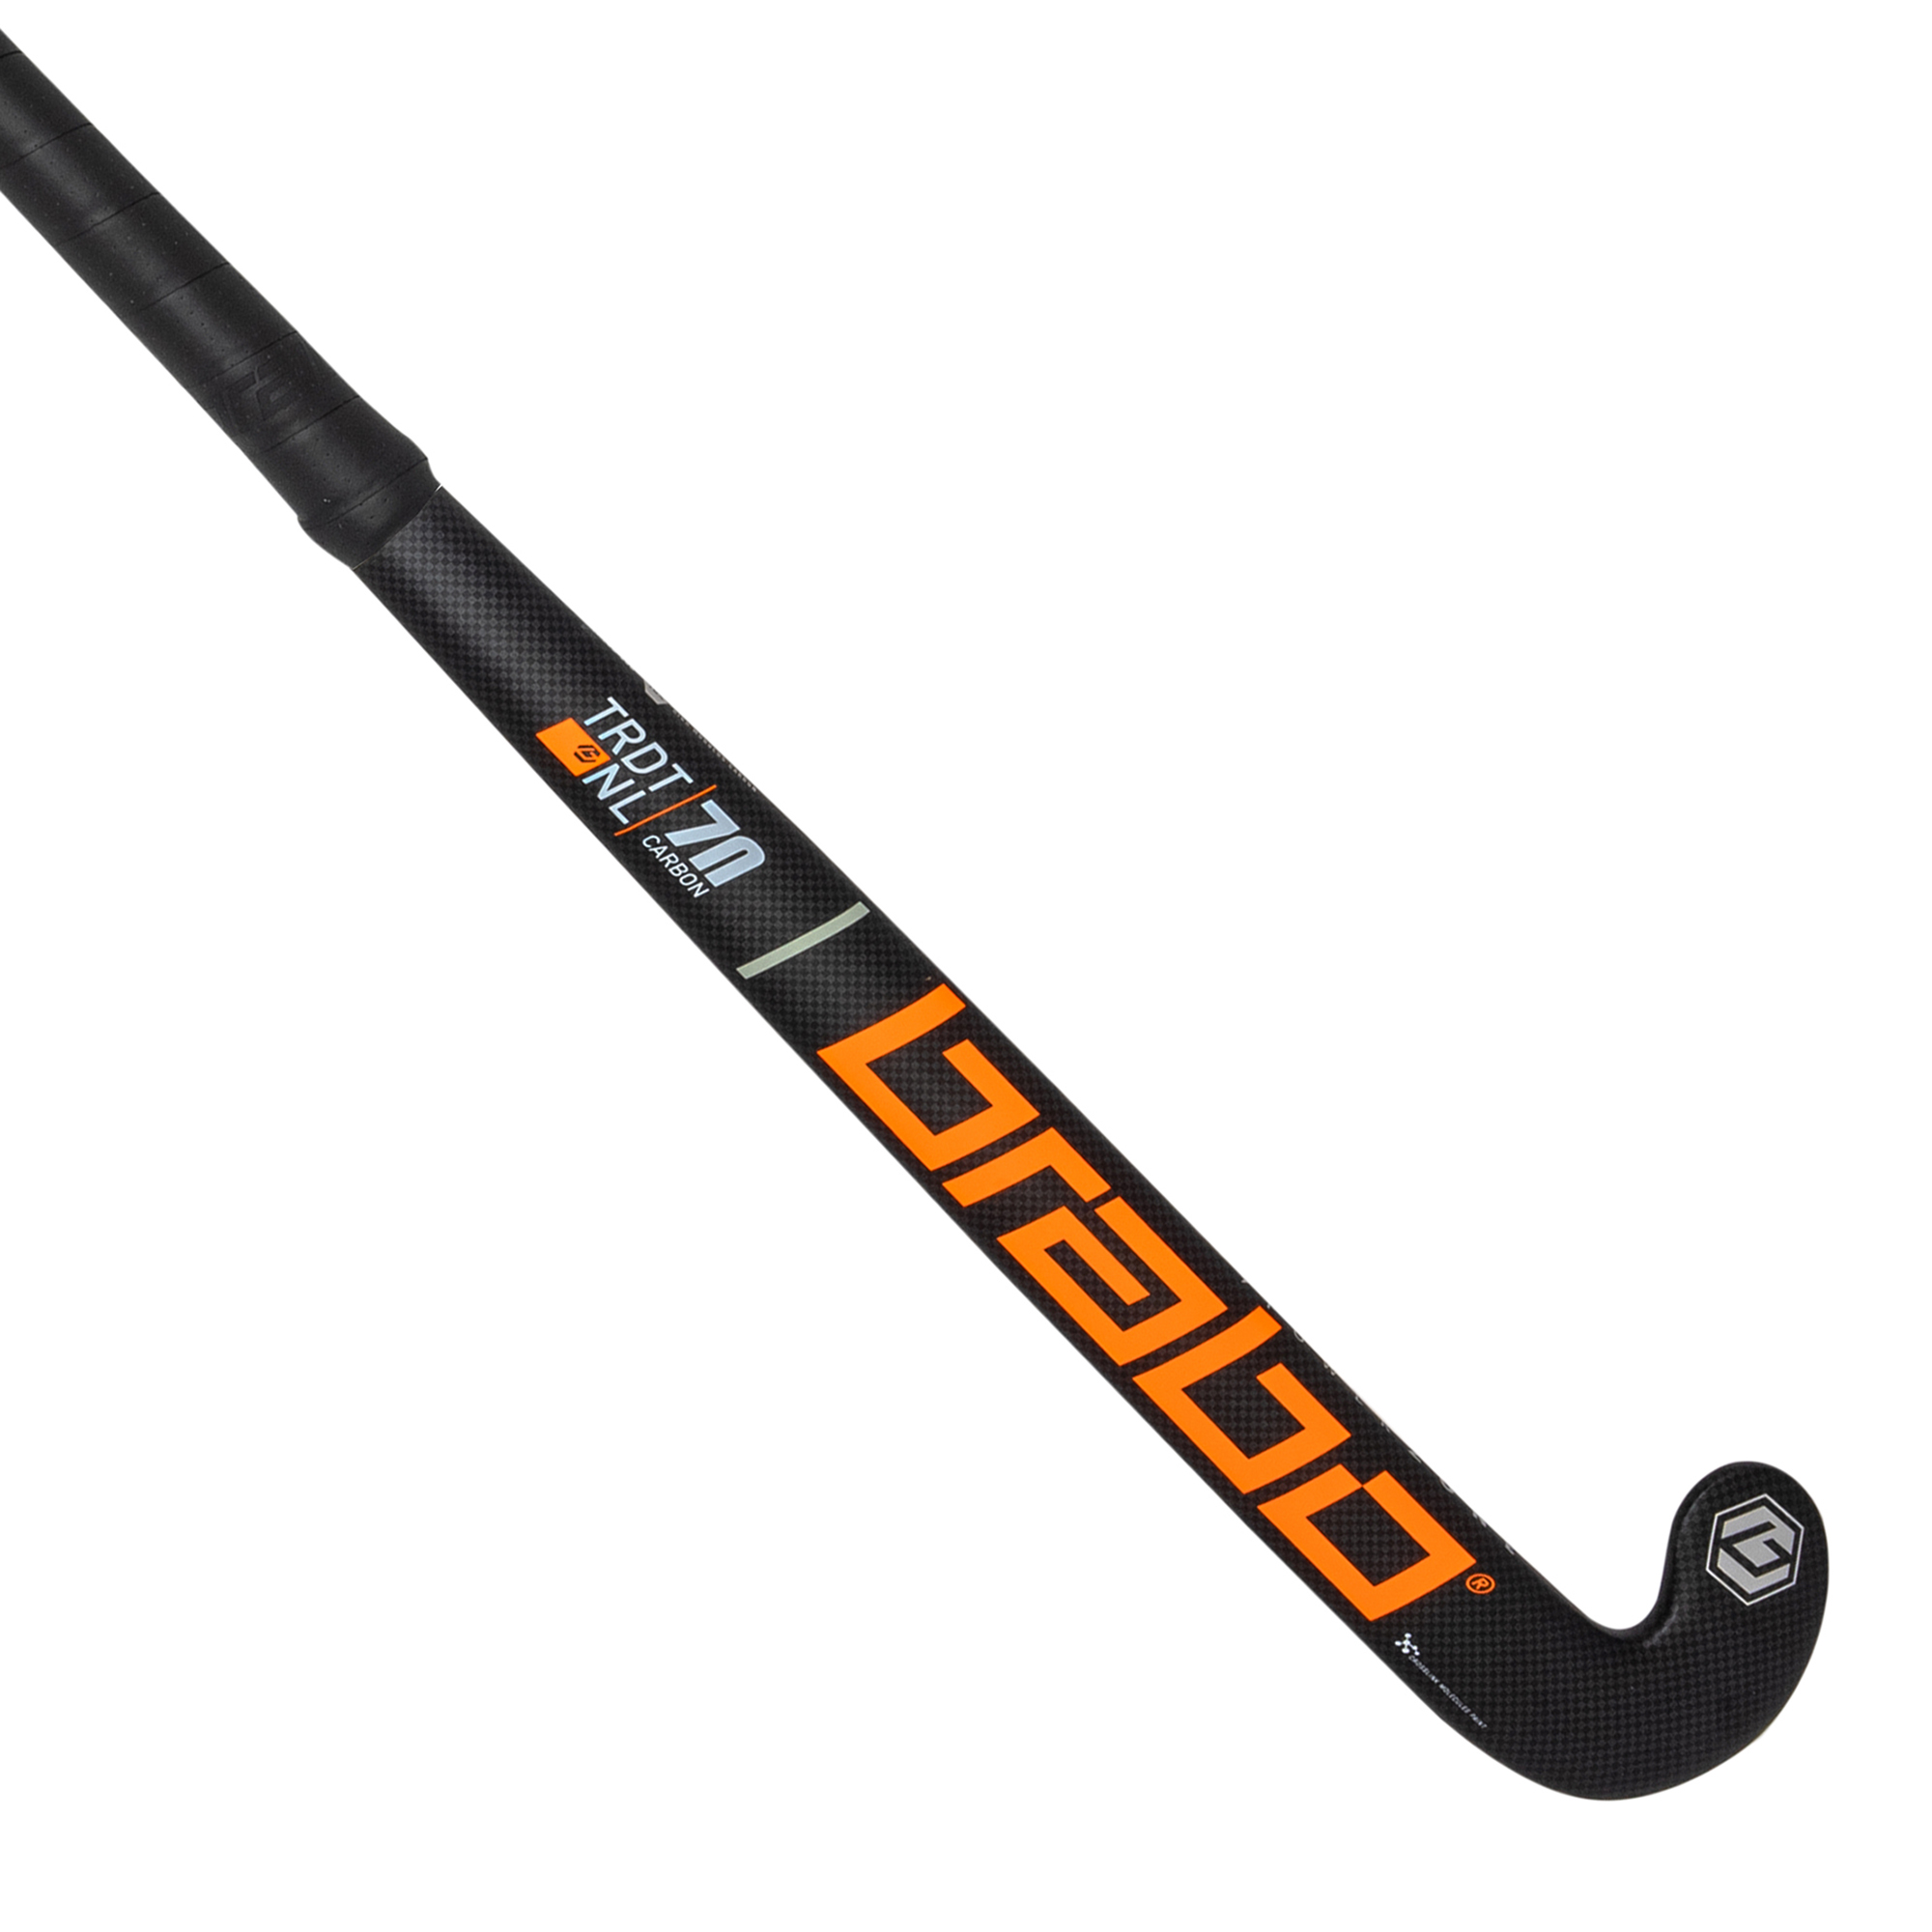 IT Traditional Carbon 70 Classic Curve